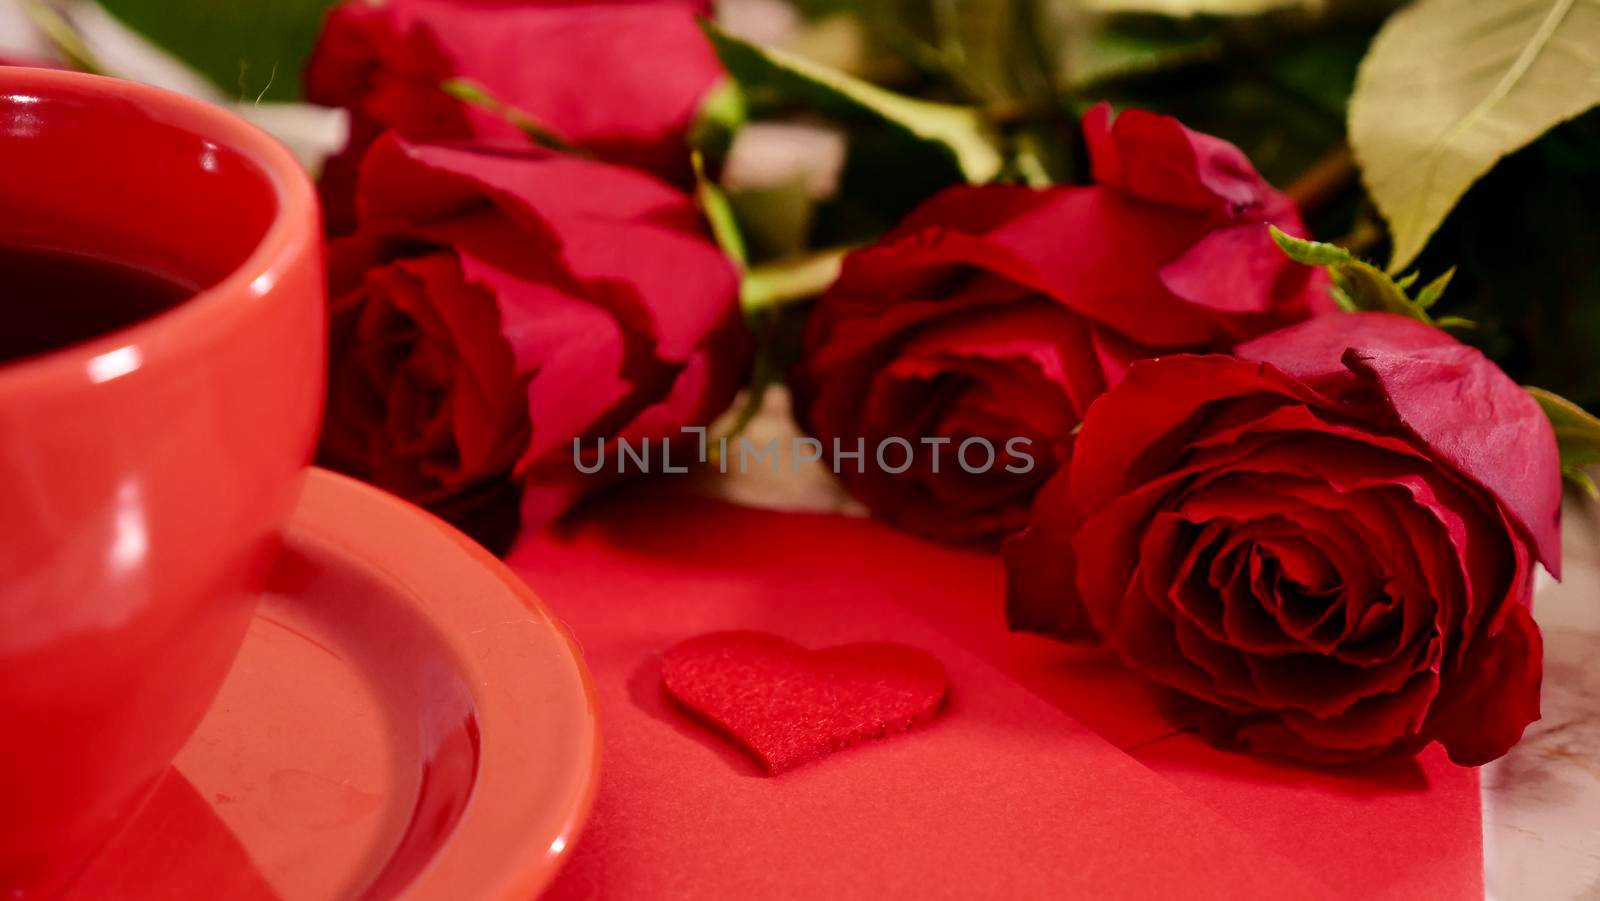 Coffee and flowers red roses for Valentine's Day by OksanaFedorchuk